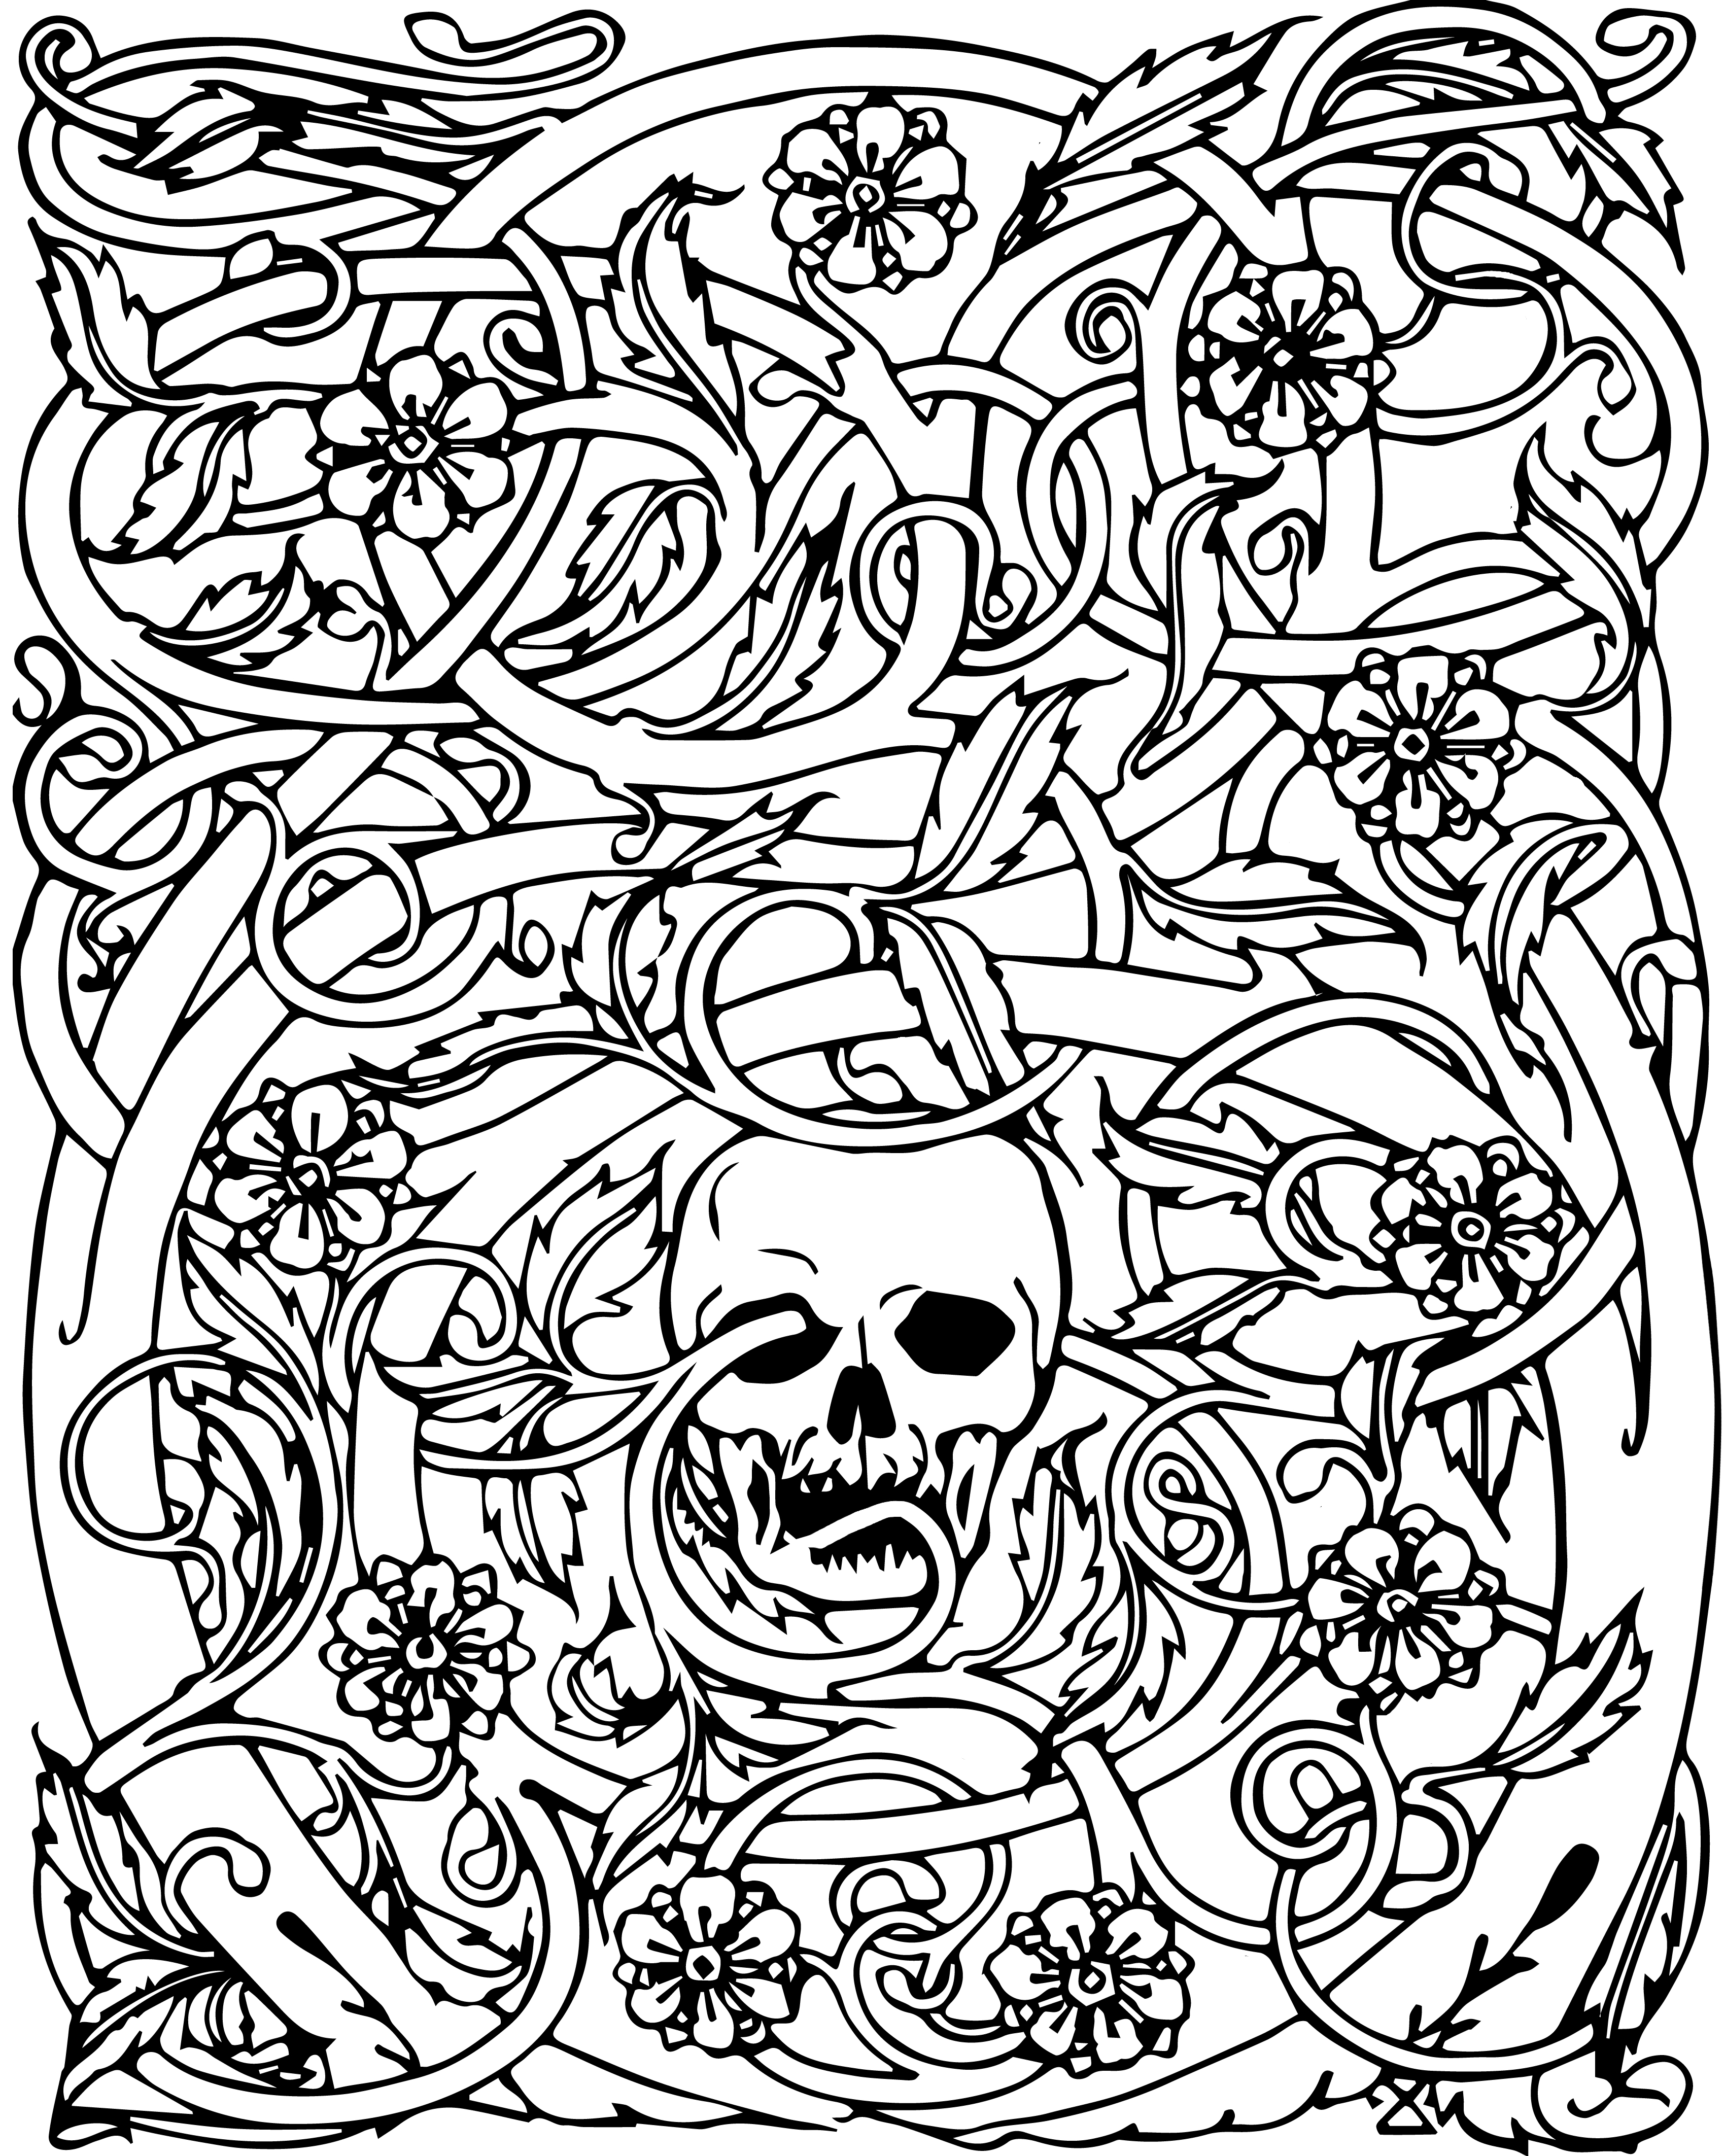 Coloring Pages For Adults Skulls At Free Printable Colorings Pages To Print 6002